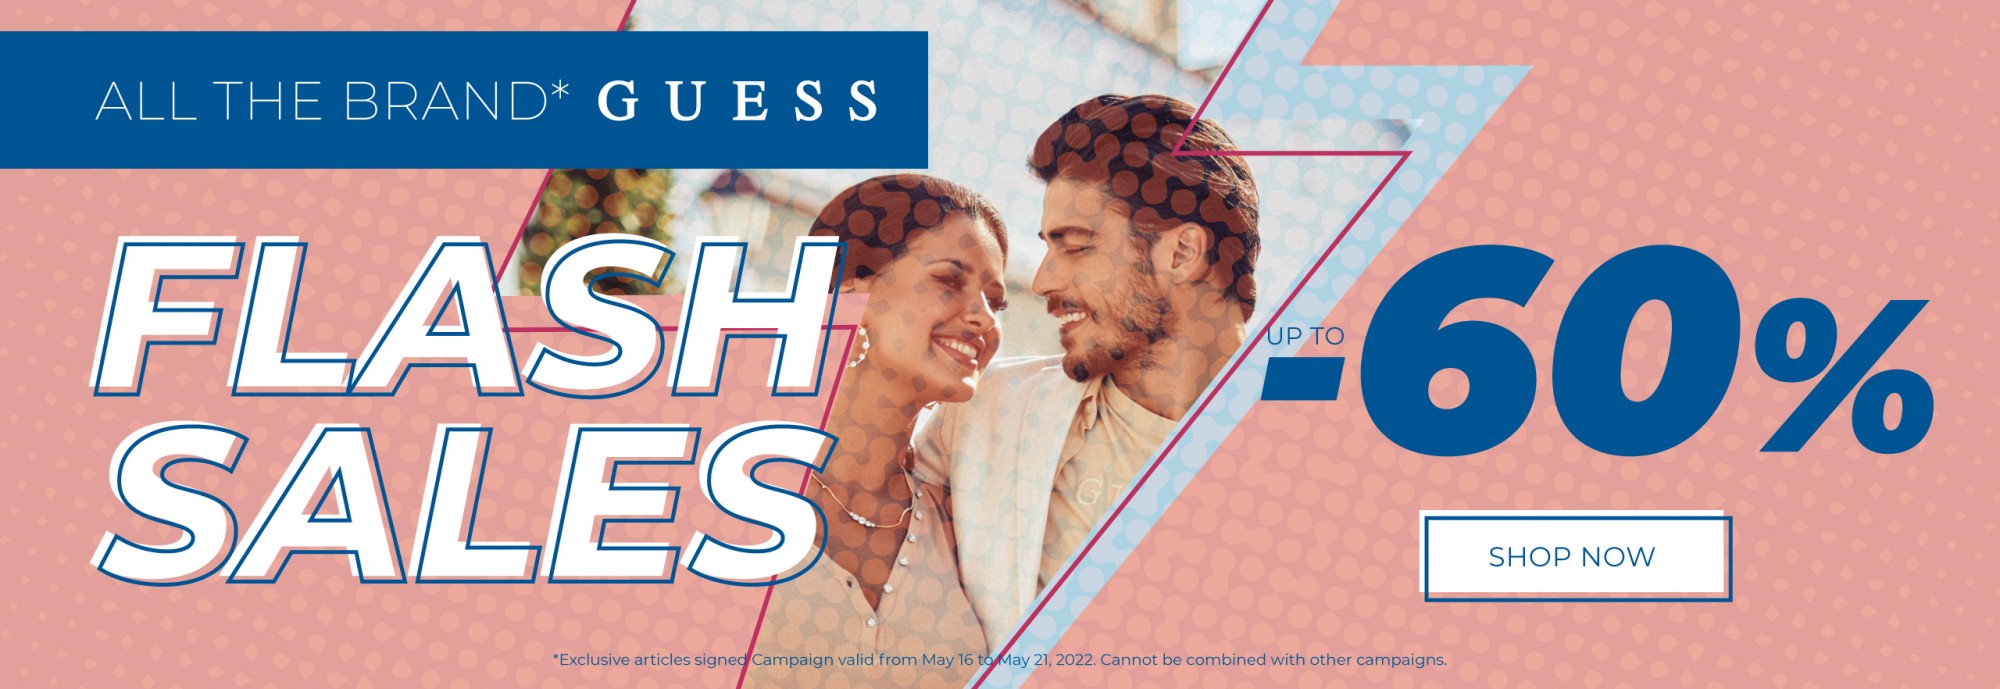 Flash Sales Guess at Mellmak: Don't miss the best fashion trends in clothing, footwear and accessories with Guess. Find the best products in our online store with Guess, Lacoste, Armani Exchange, Antony Morato, Mayoral, Boss, Calvin Klein, Champion, Giose